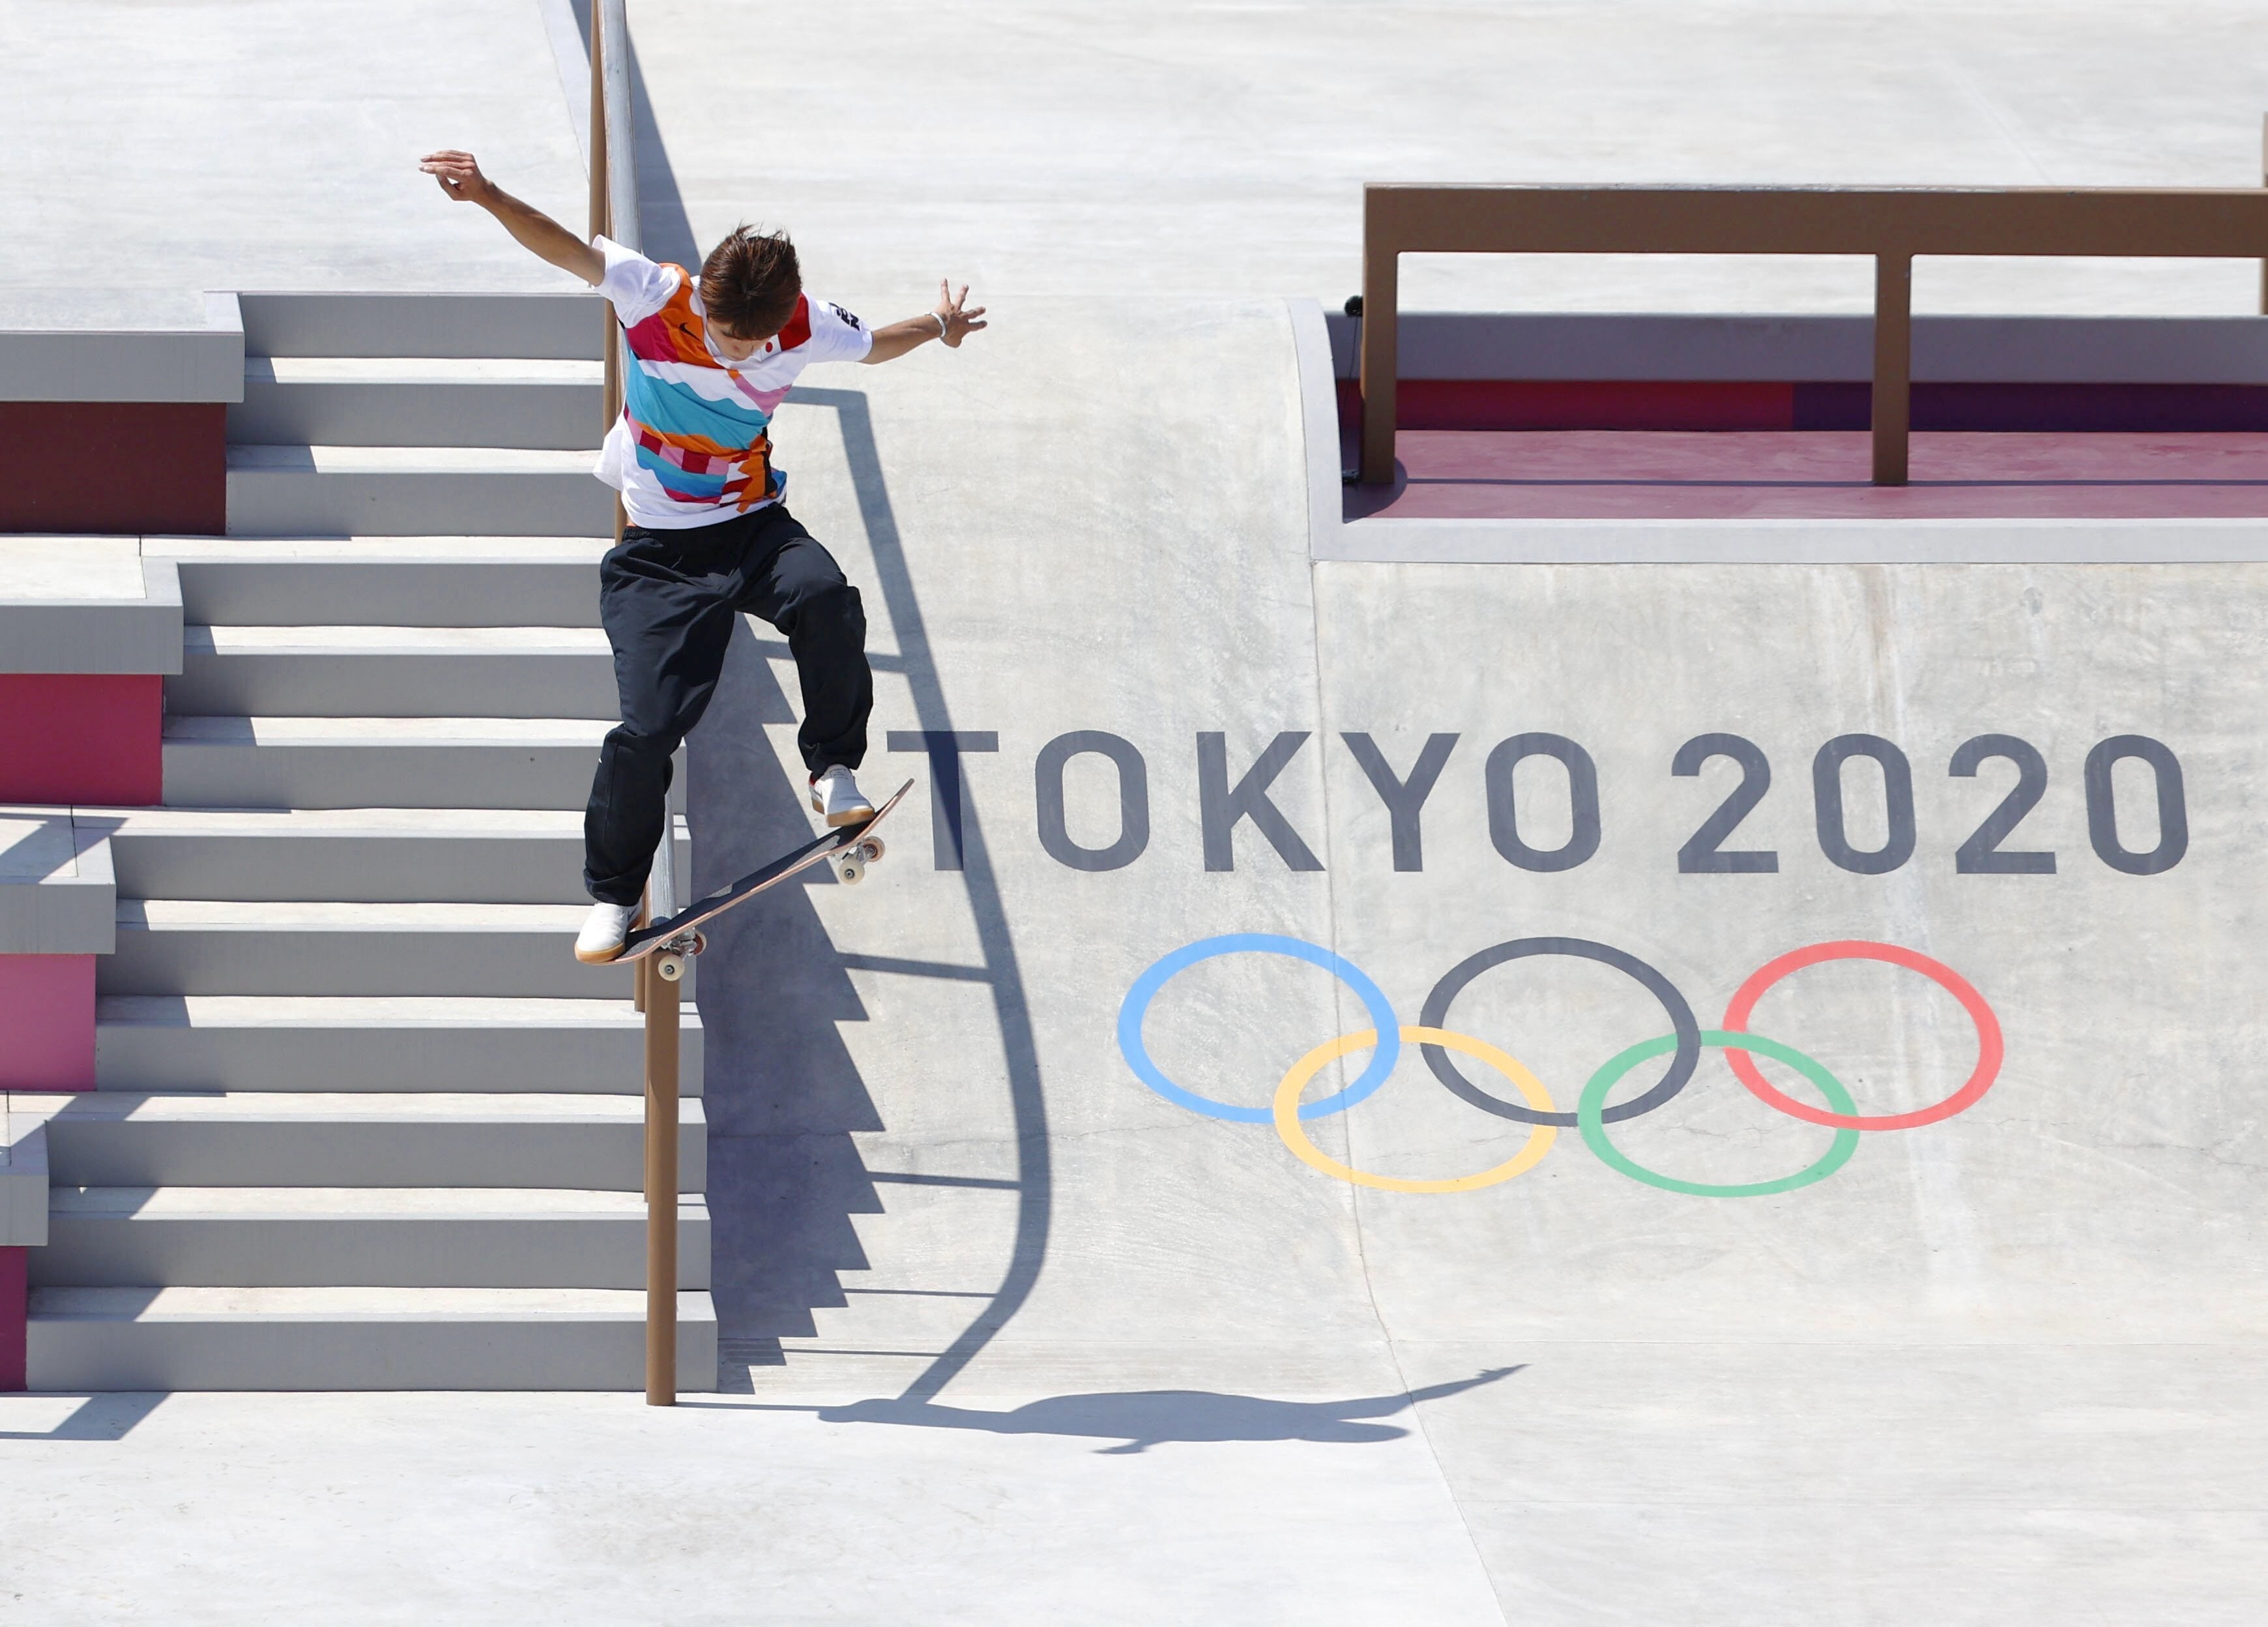 Japan’s Yuto Horigome competes in the men's street skateboarding finals at the Tokyo Olympics. Photo: Kyodo